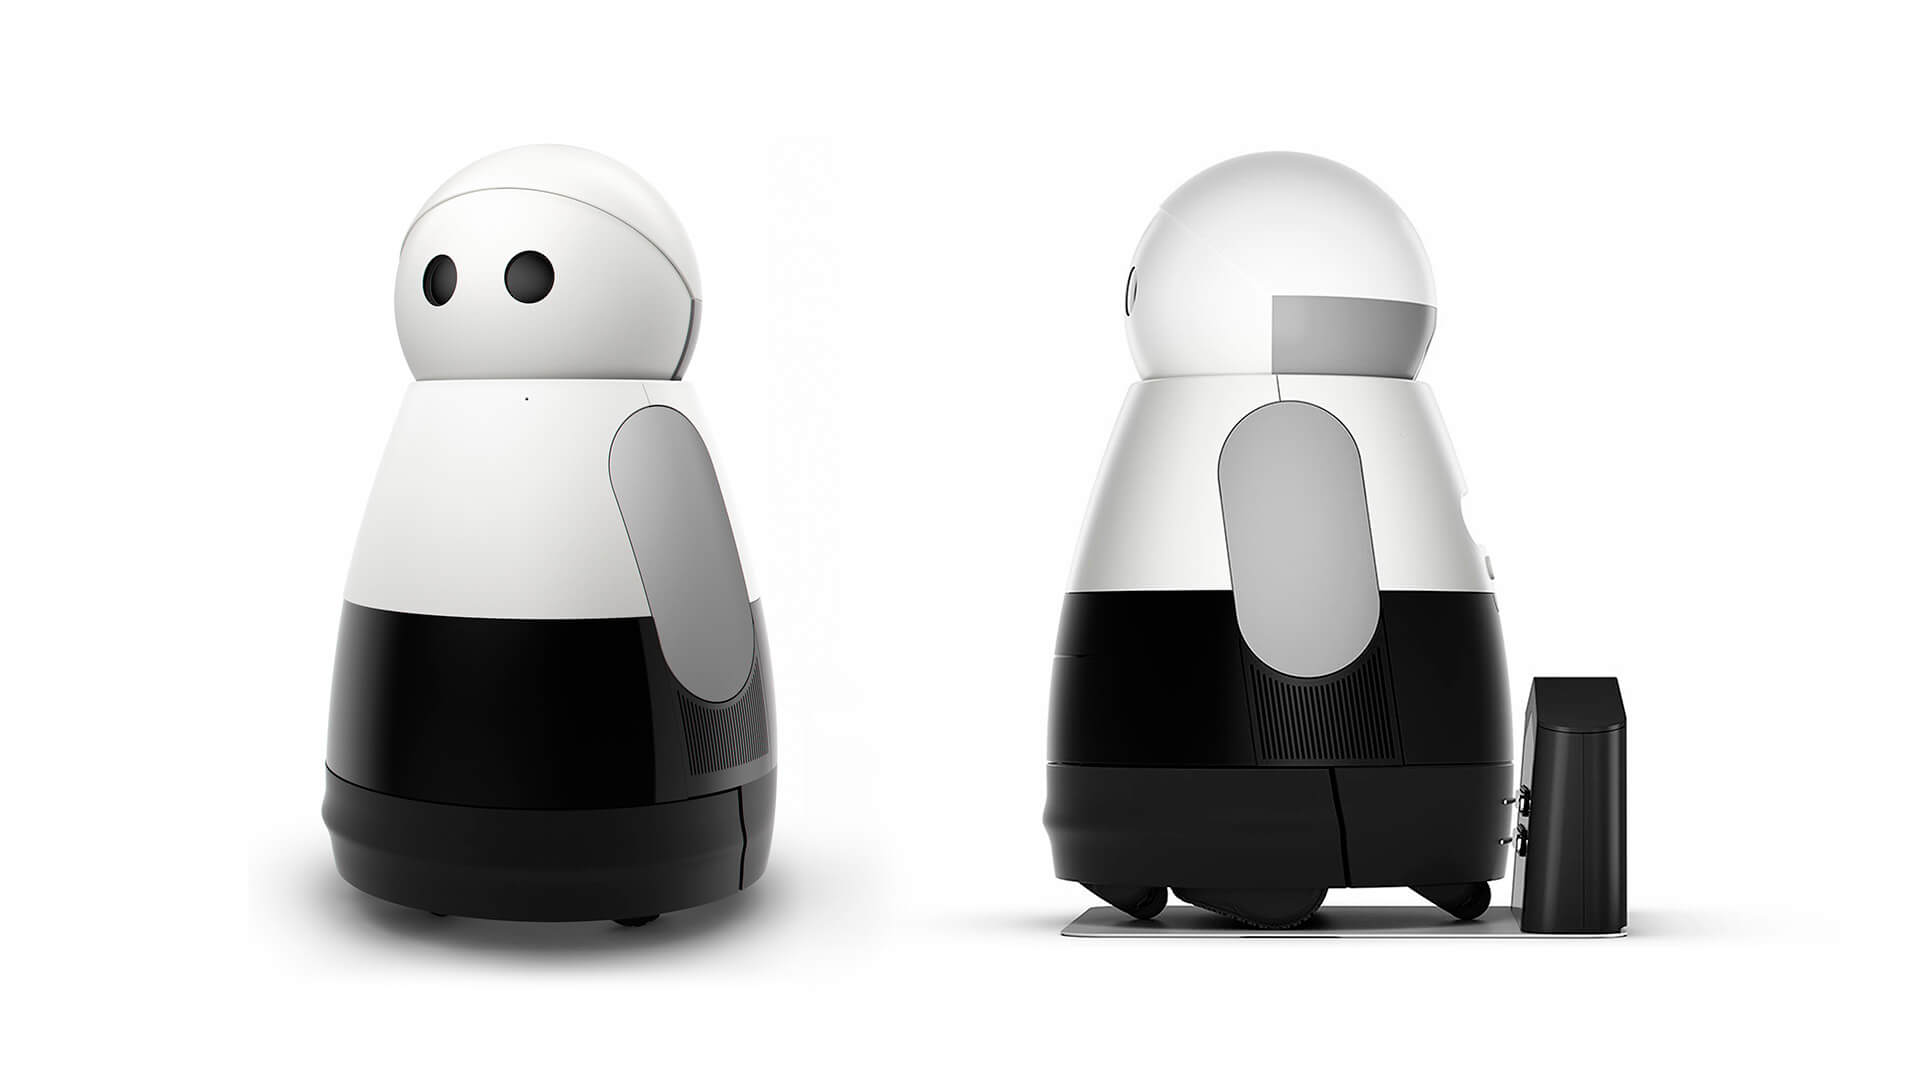 A front and side view of Kuri, a modern, anthropomorphic robot with a black and white color scheme, accompanied by a charging dock.